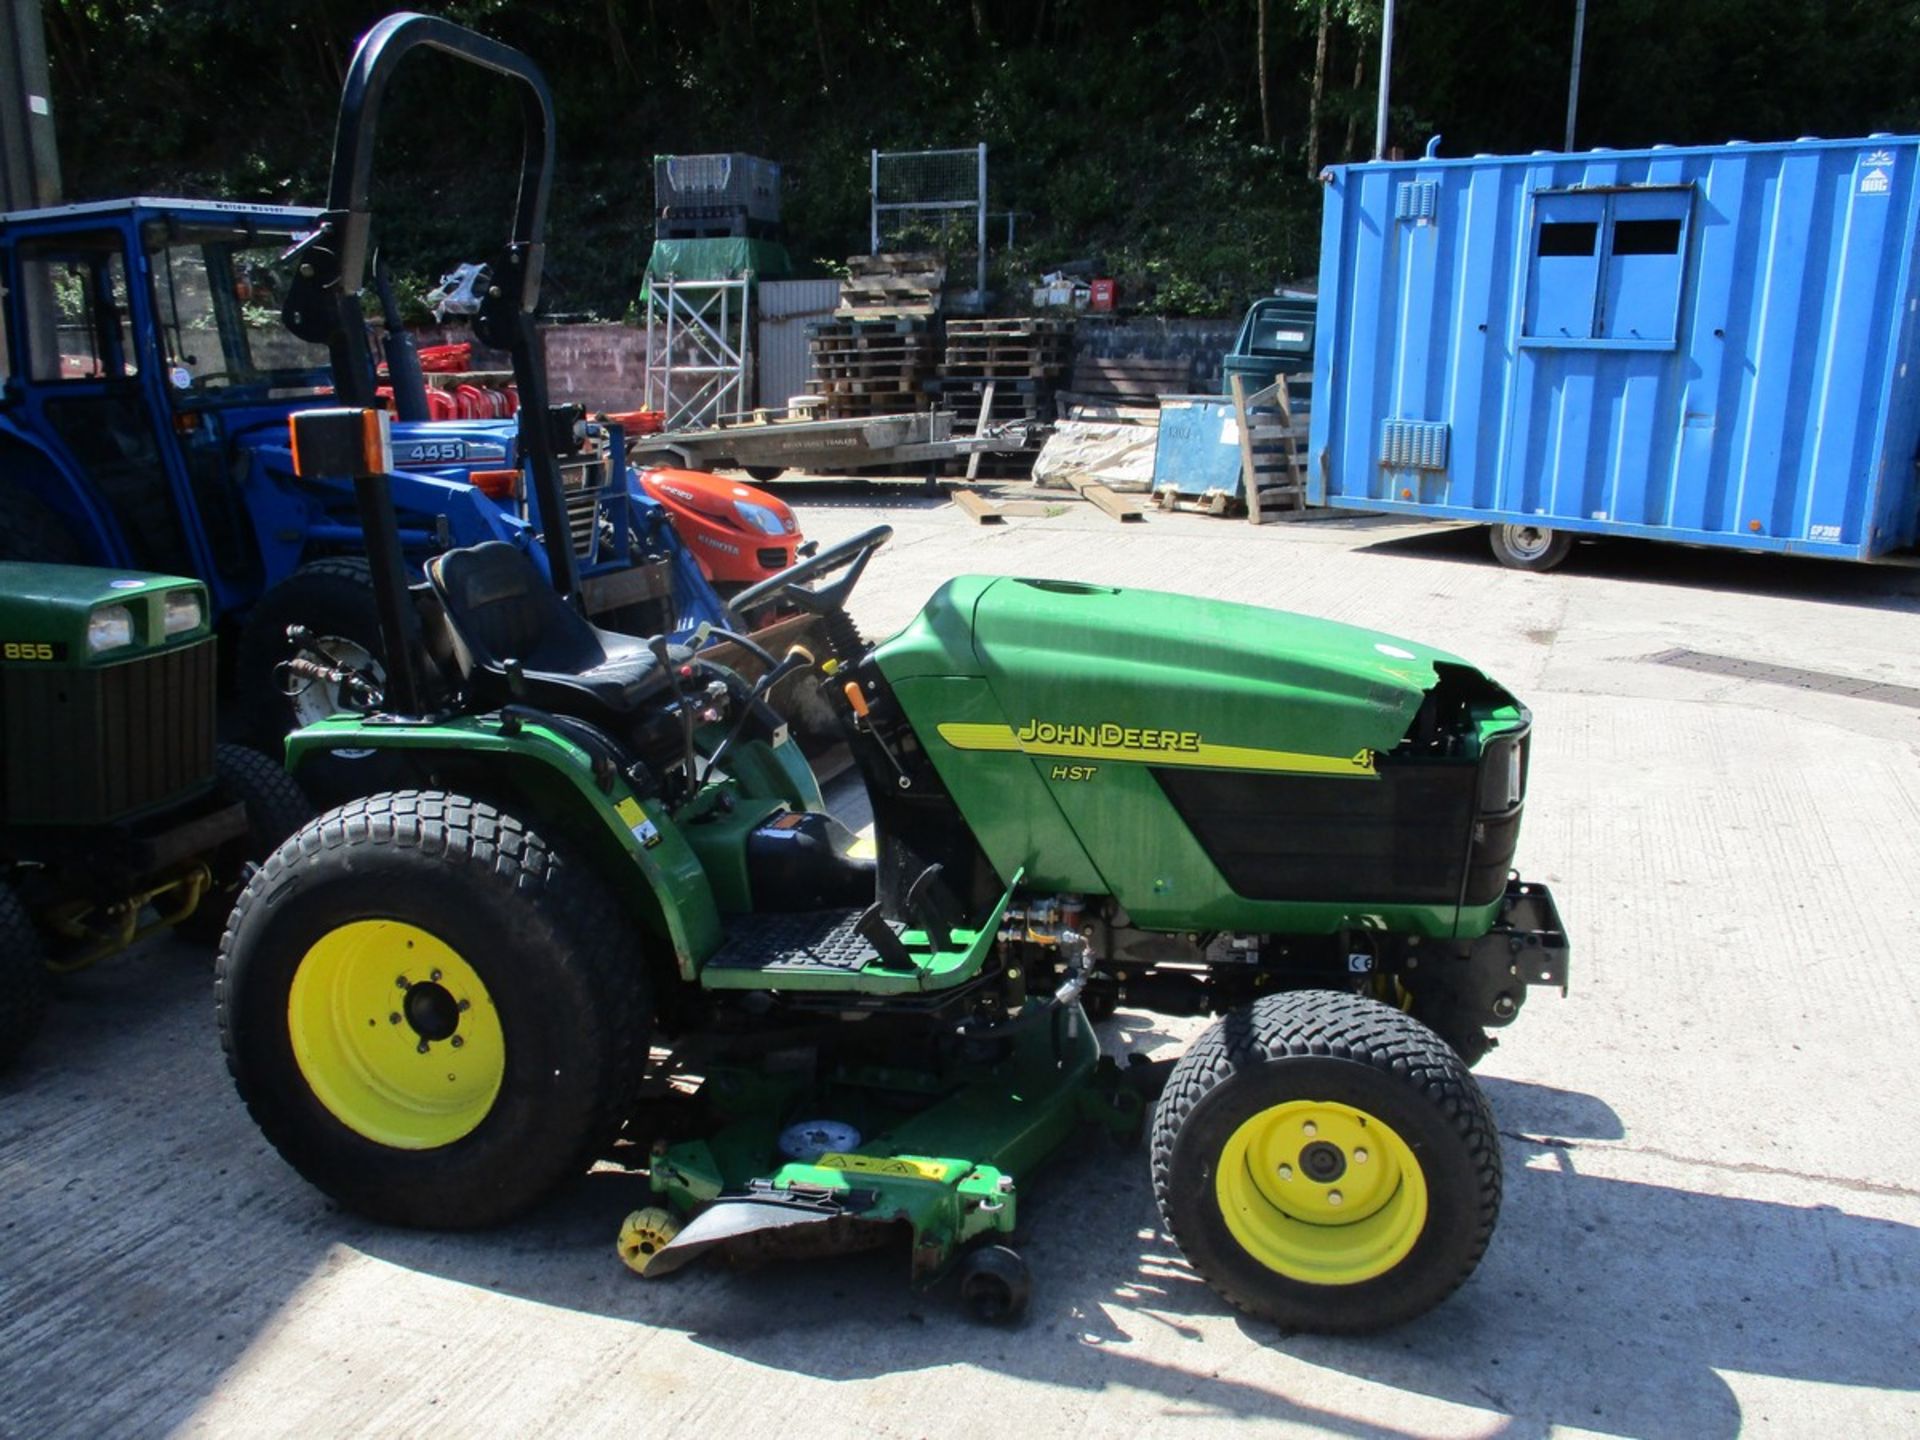 JOHN DEERE 4115 DIESEL COMPACT TRACTOR C.W MID MOUNTED DECK, 3 POINT LINKAGE, SHOWING 1389HRS - Image 2 of 5